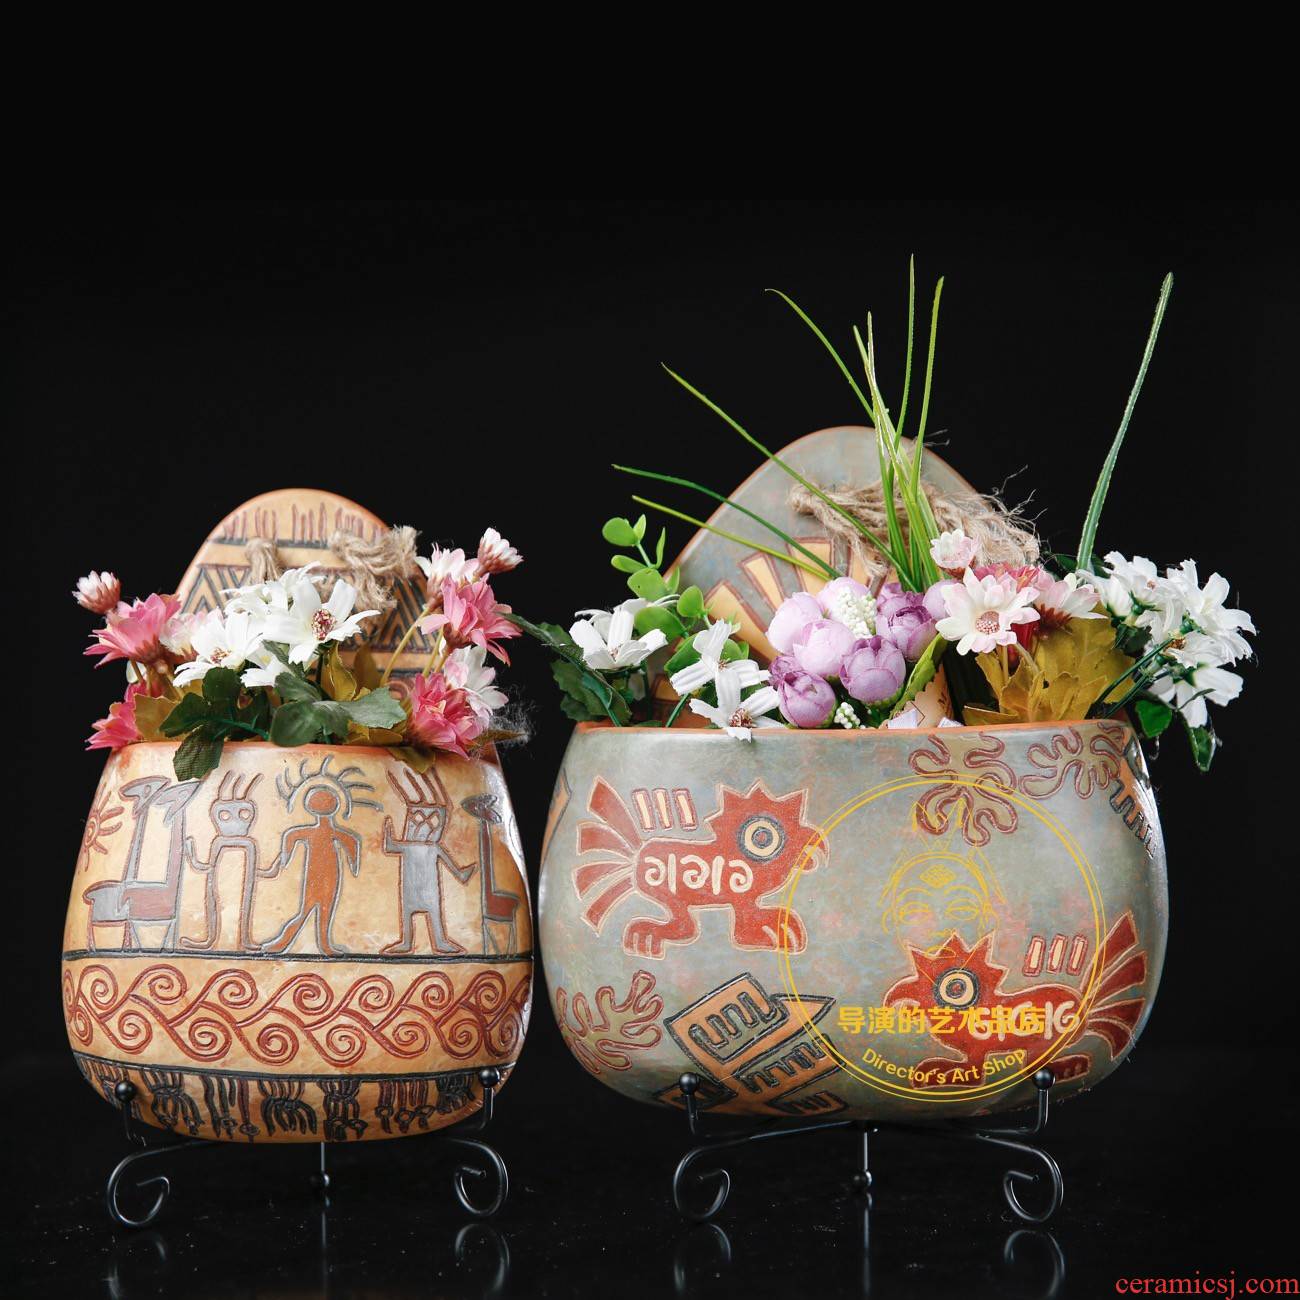 Maya Indian culture in South America Peru ceramics flower basket vase is placed pendant checking soft decoration